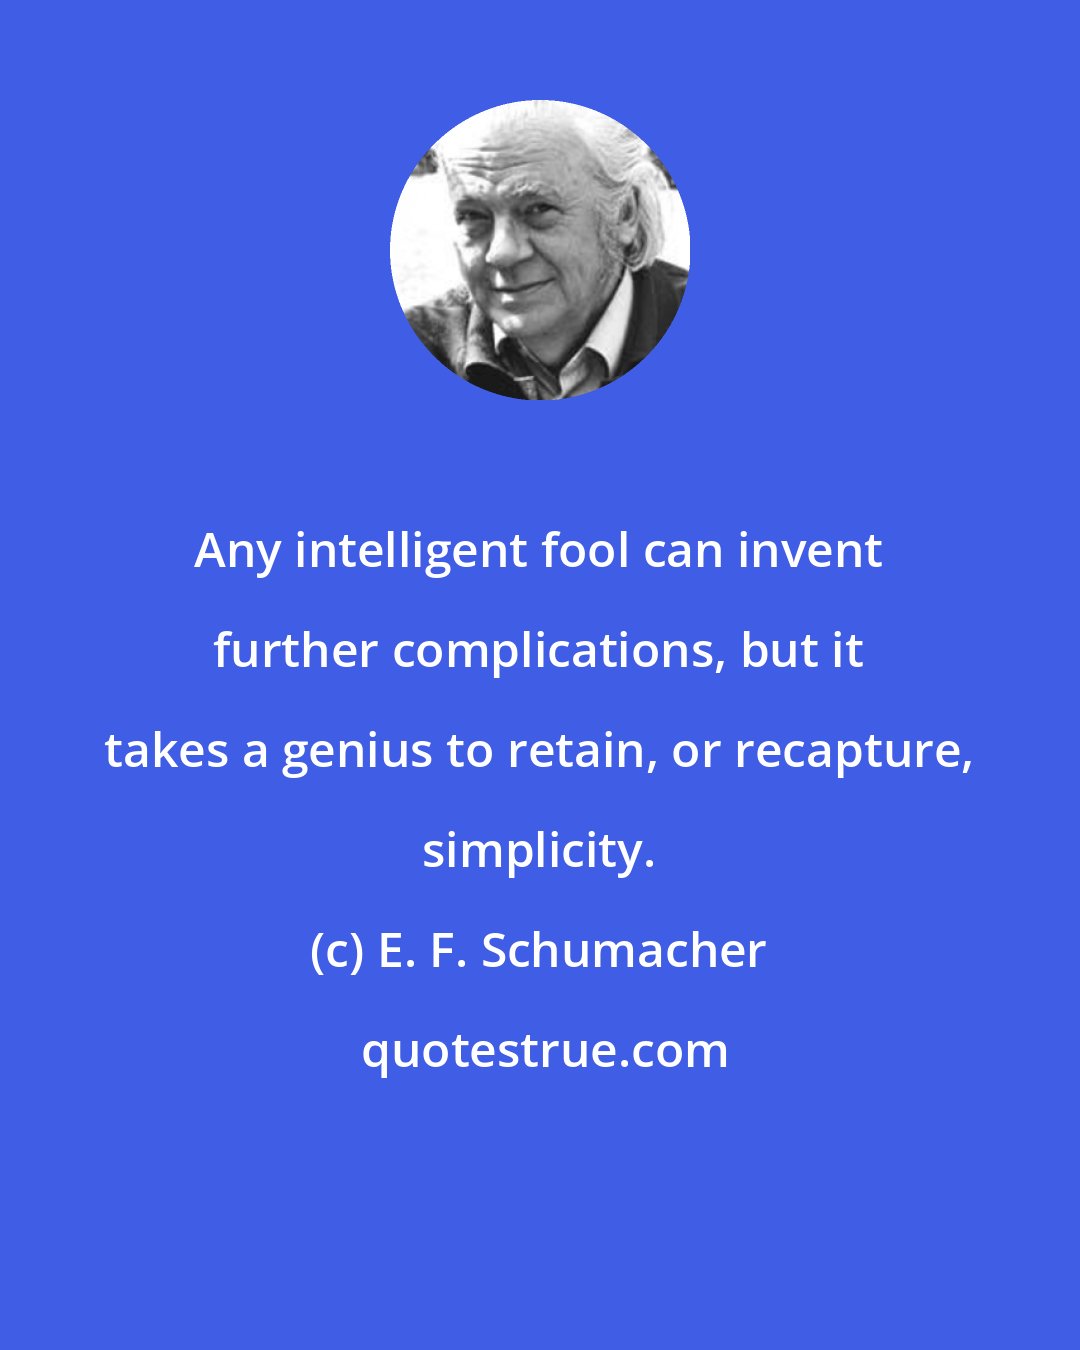 E. F. Schumacher: Any intelligent fool can invent further complications, but it takes a genius to retain, or recapture, simplicity.